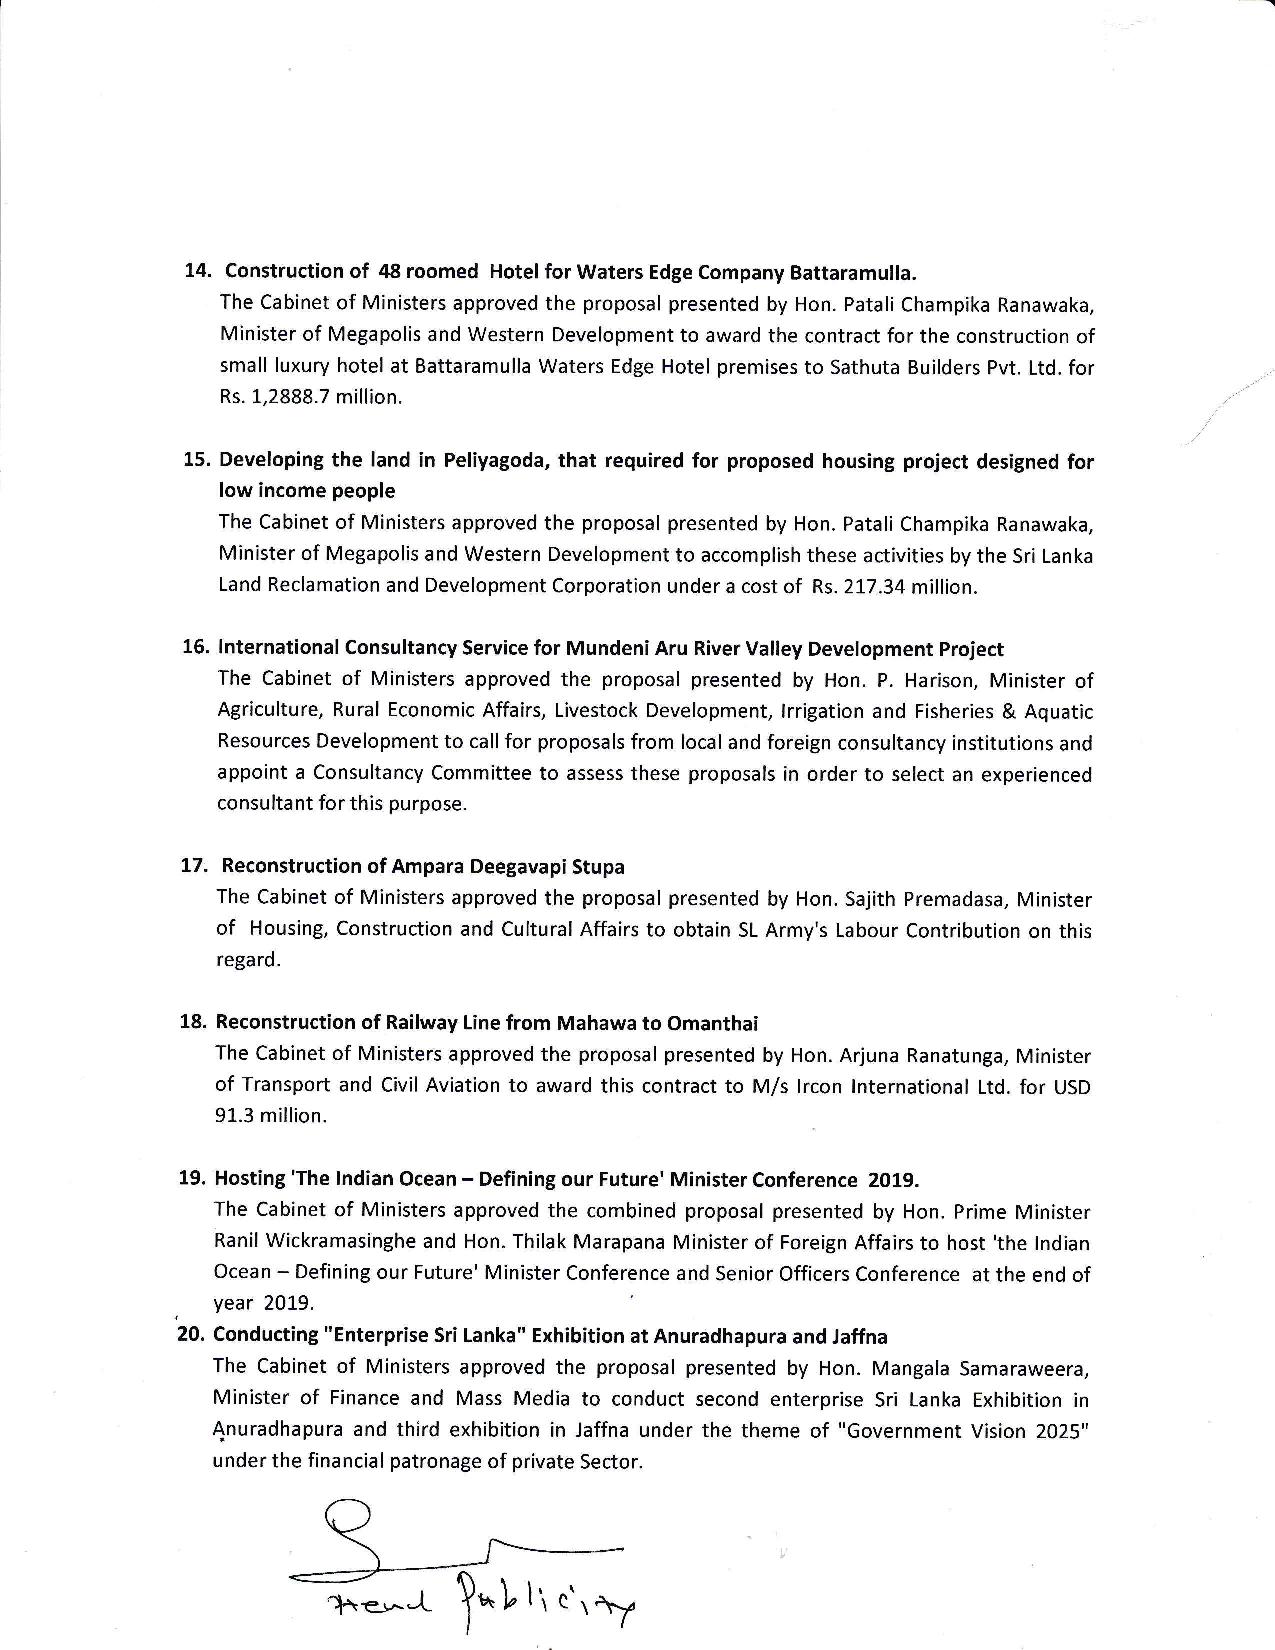 Cabinet Decision on 02.04.2019 English page 004